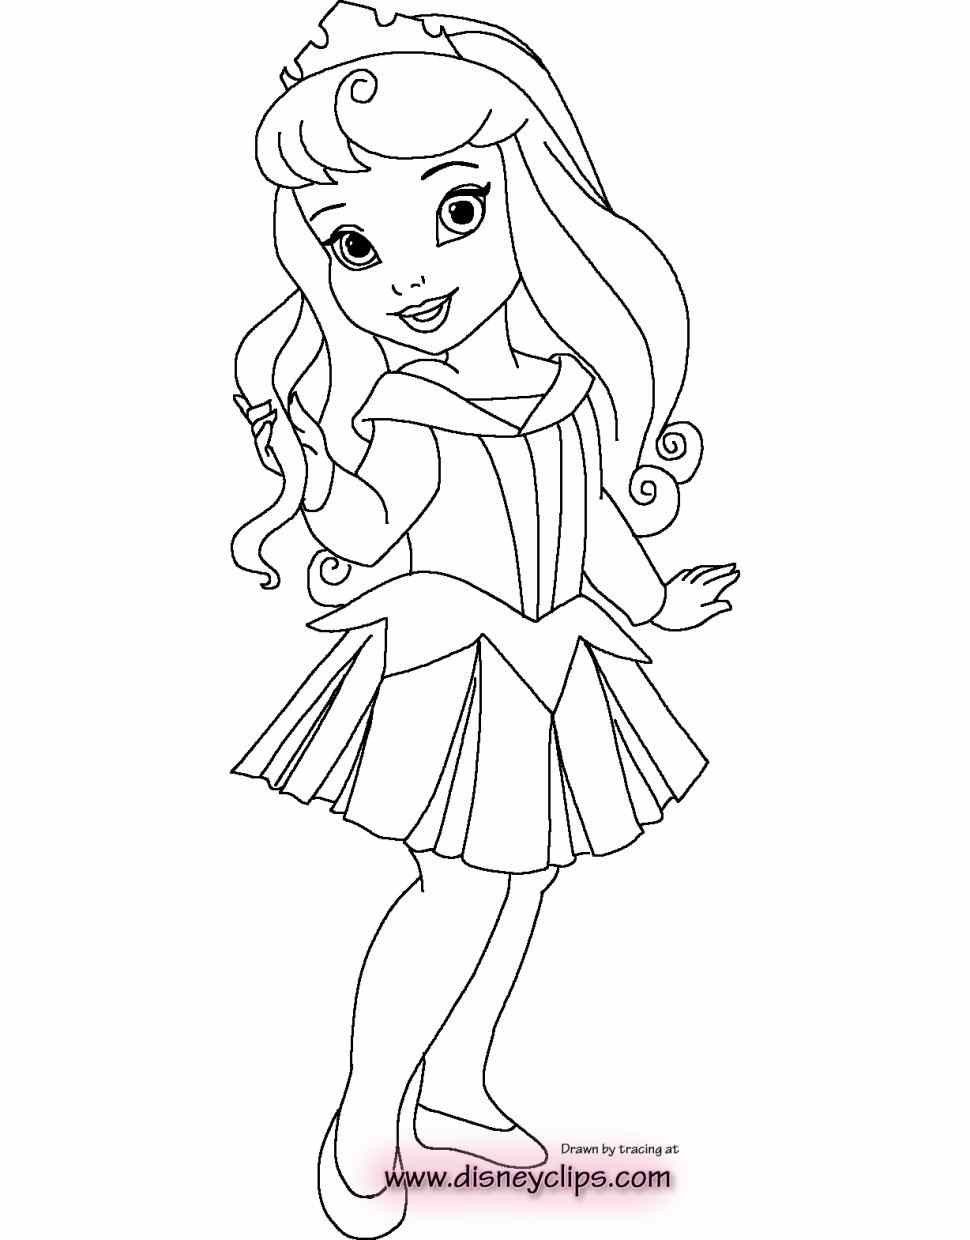 Disney Baby Princess Coloring Pages
 Baby Disney Princess Chibi Coloring Pages Sketch Coloring Page